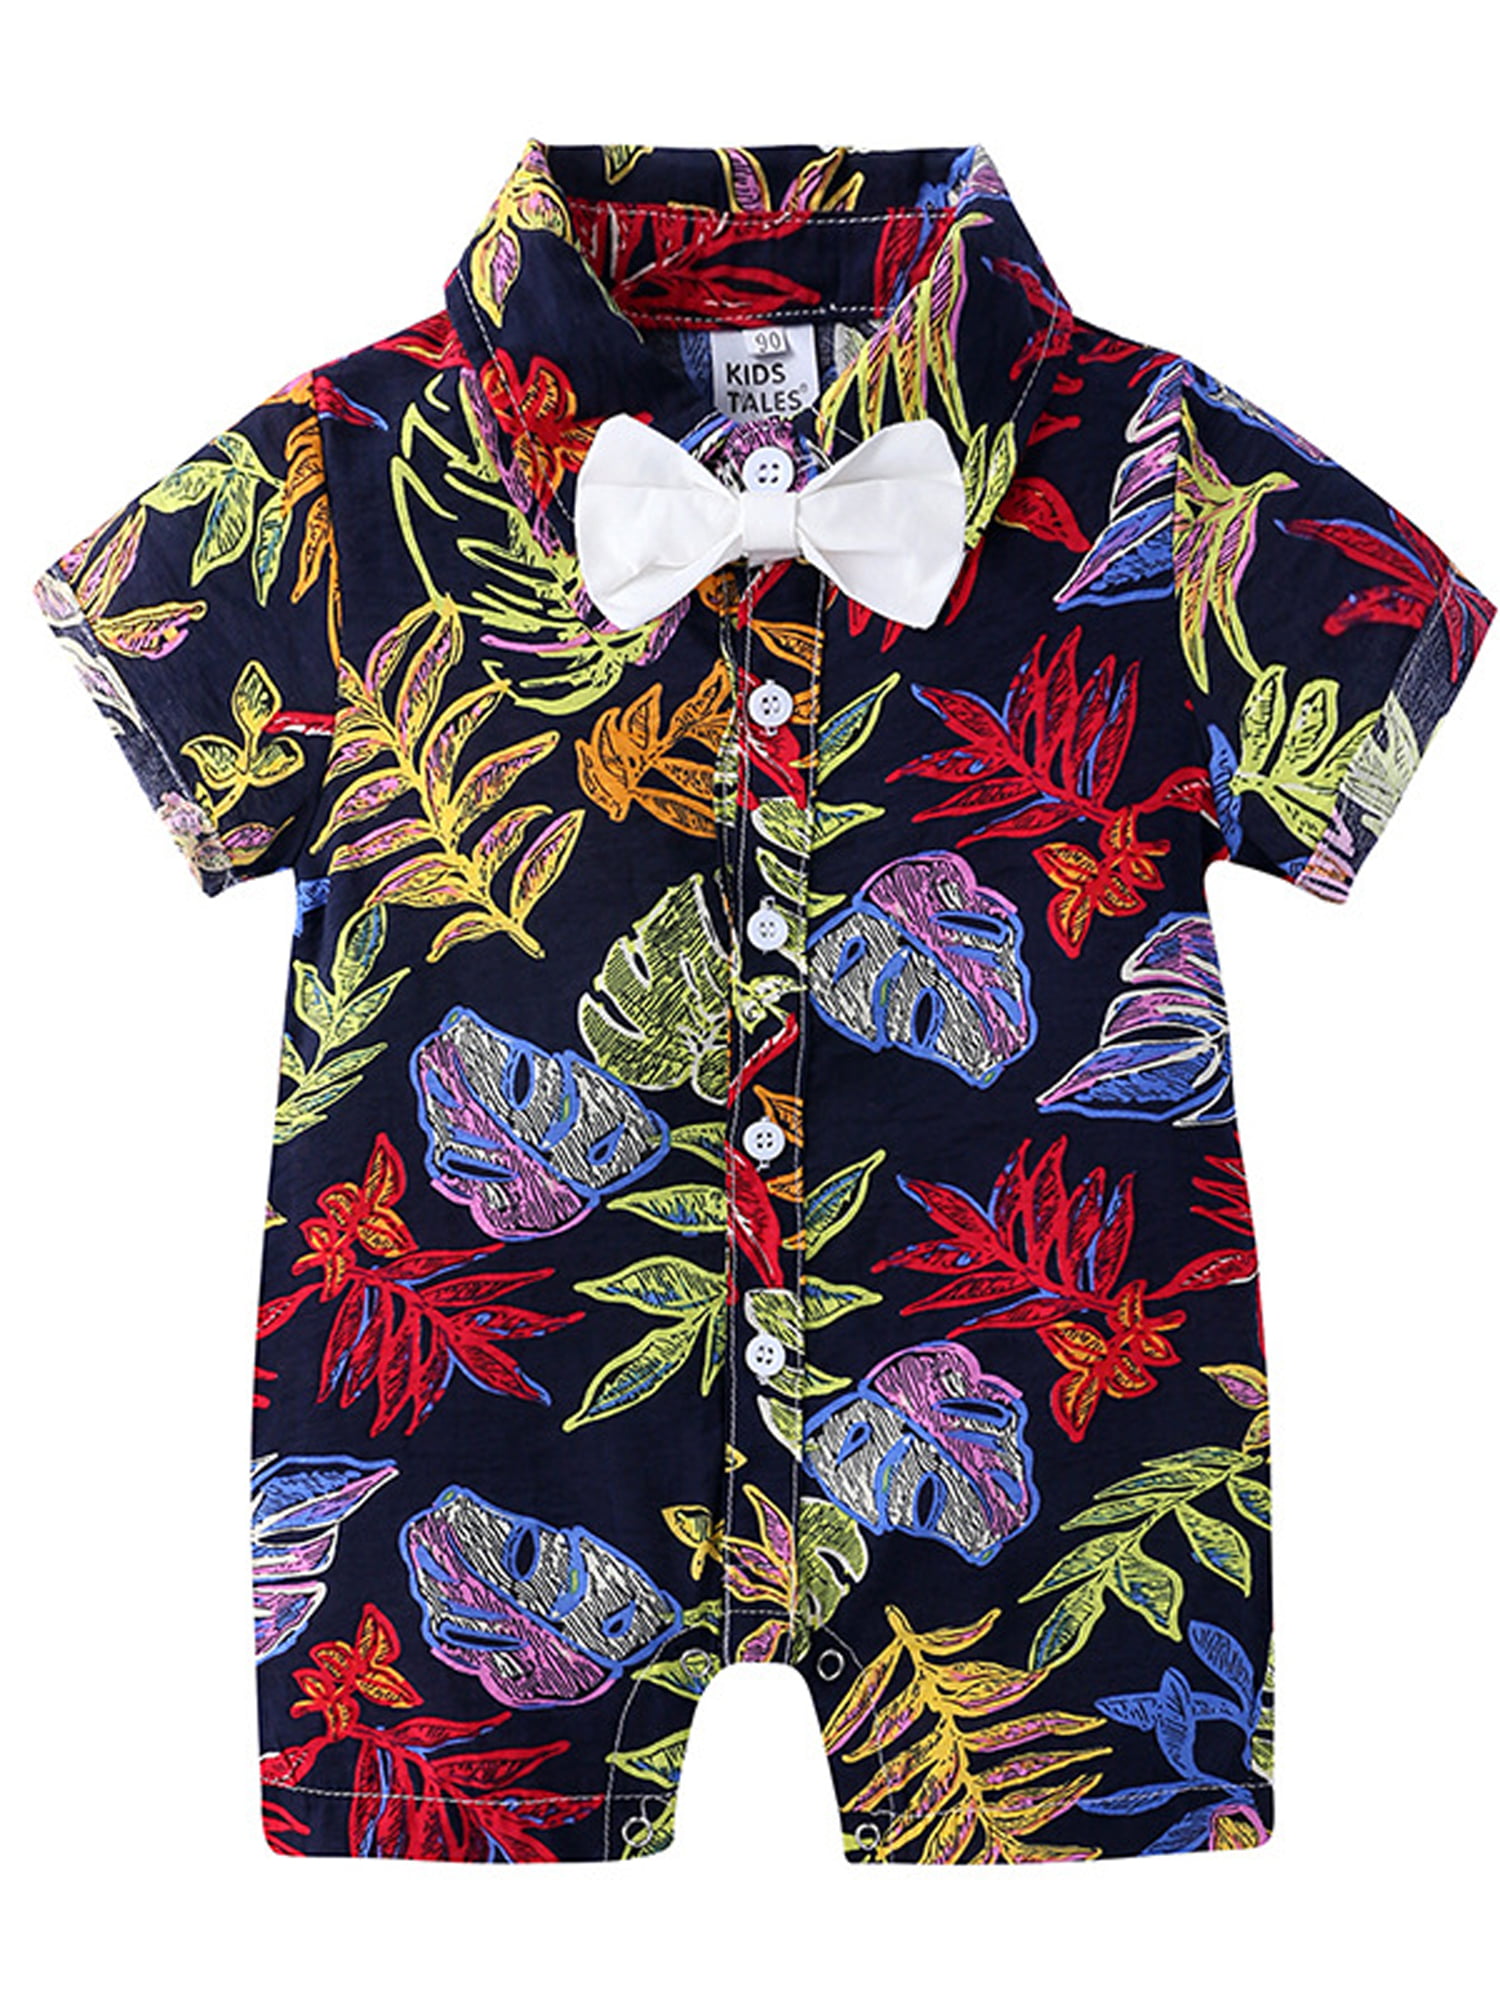 Newborn Baby Boys Summer Clothes Cotton Romper Casual Hawaiian Jumpsuit Outfit 